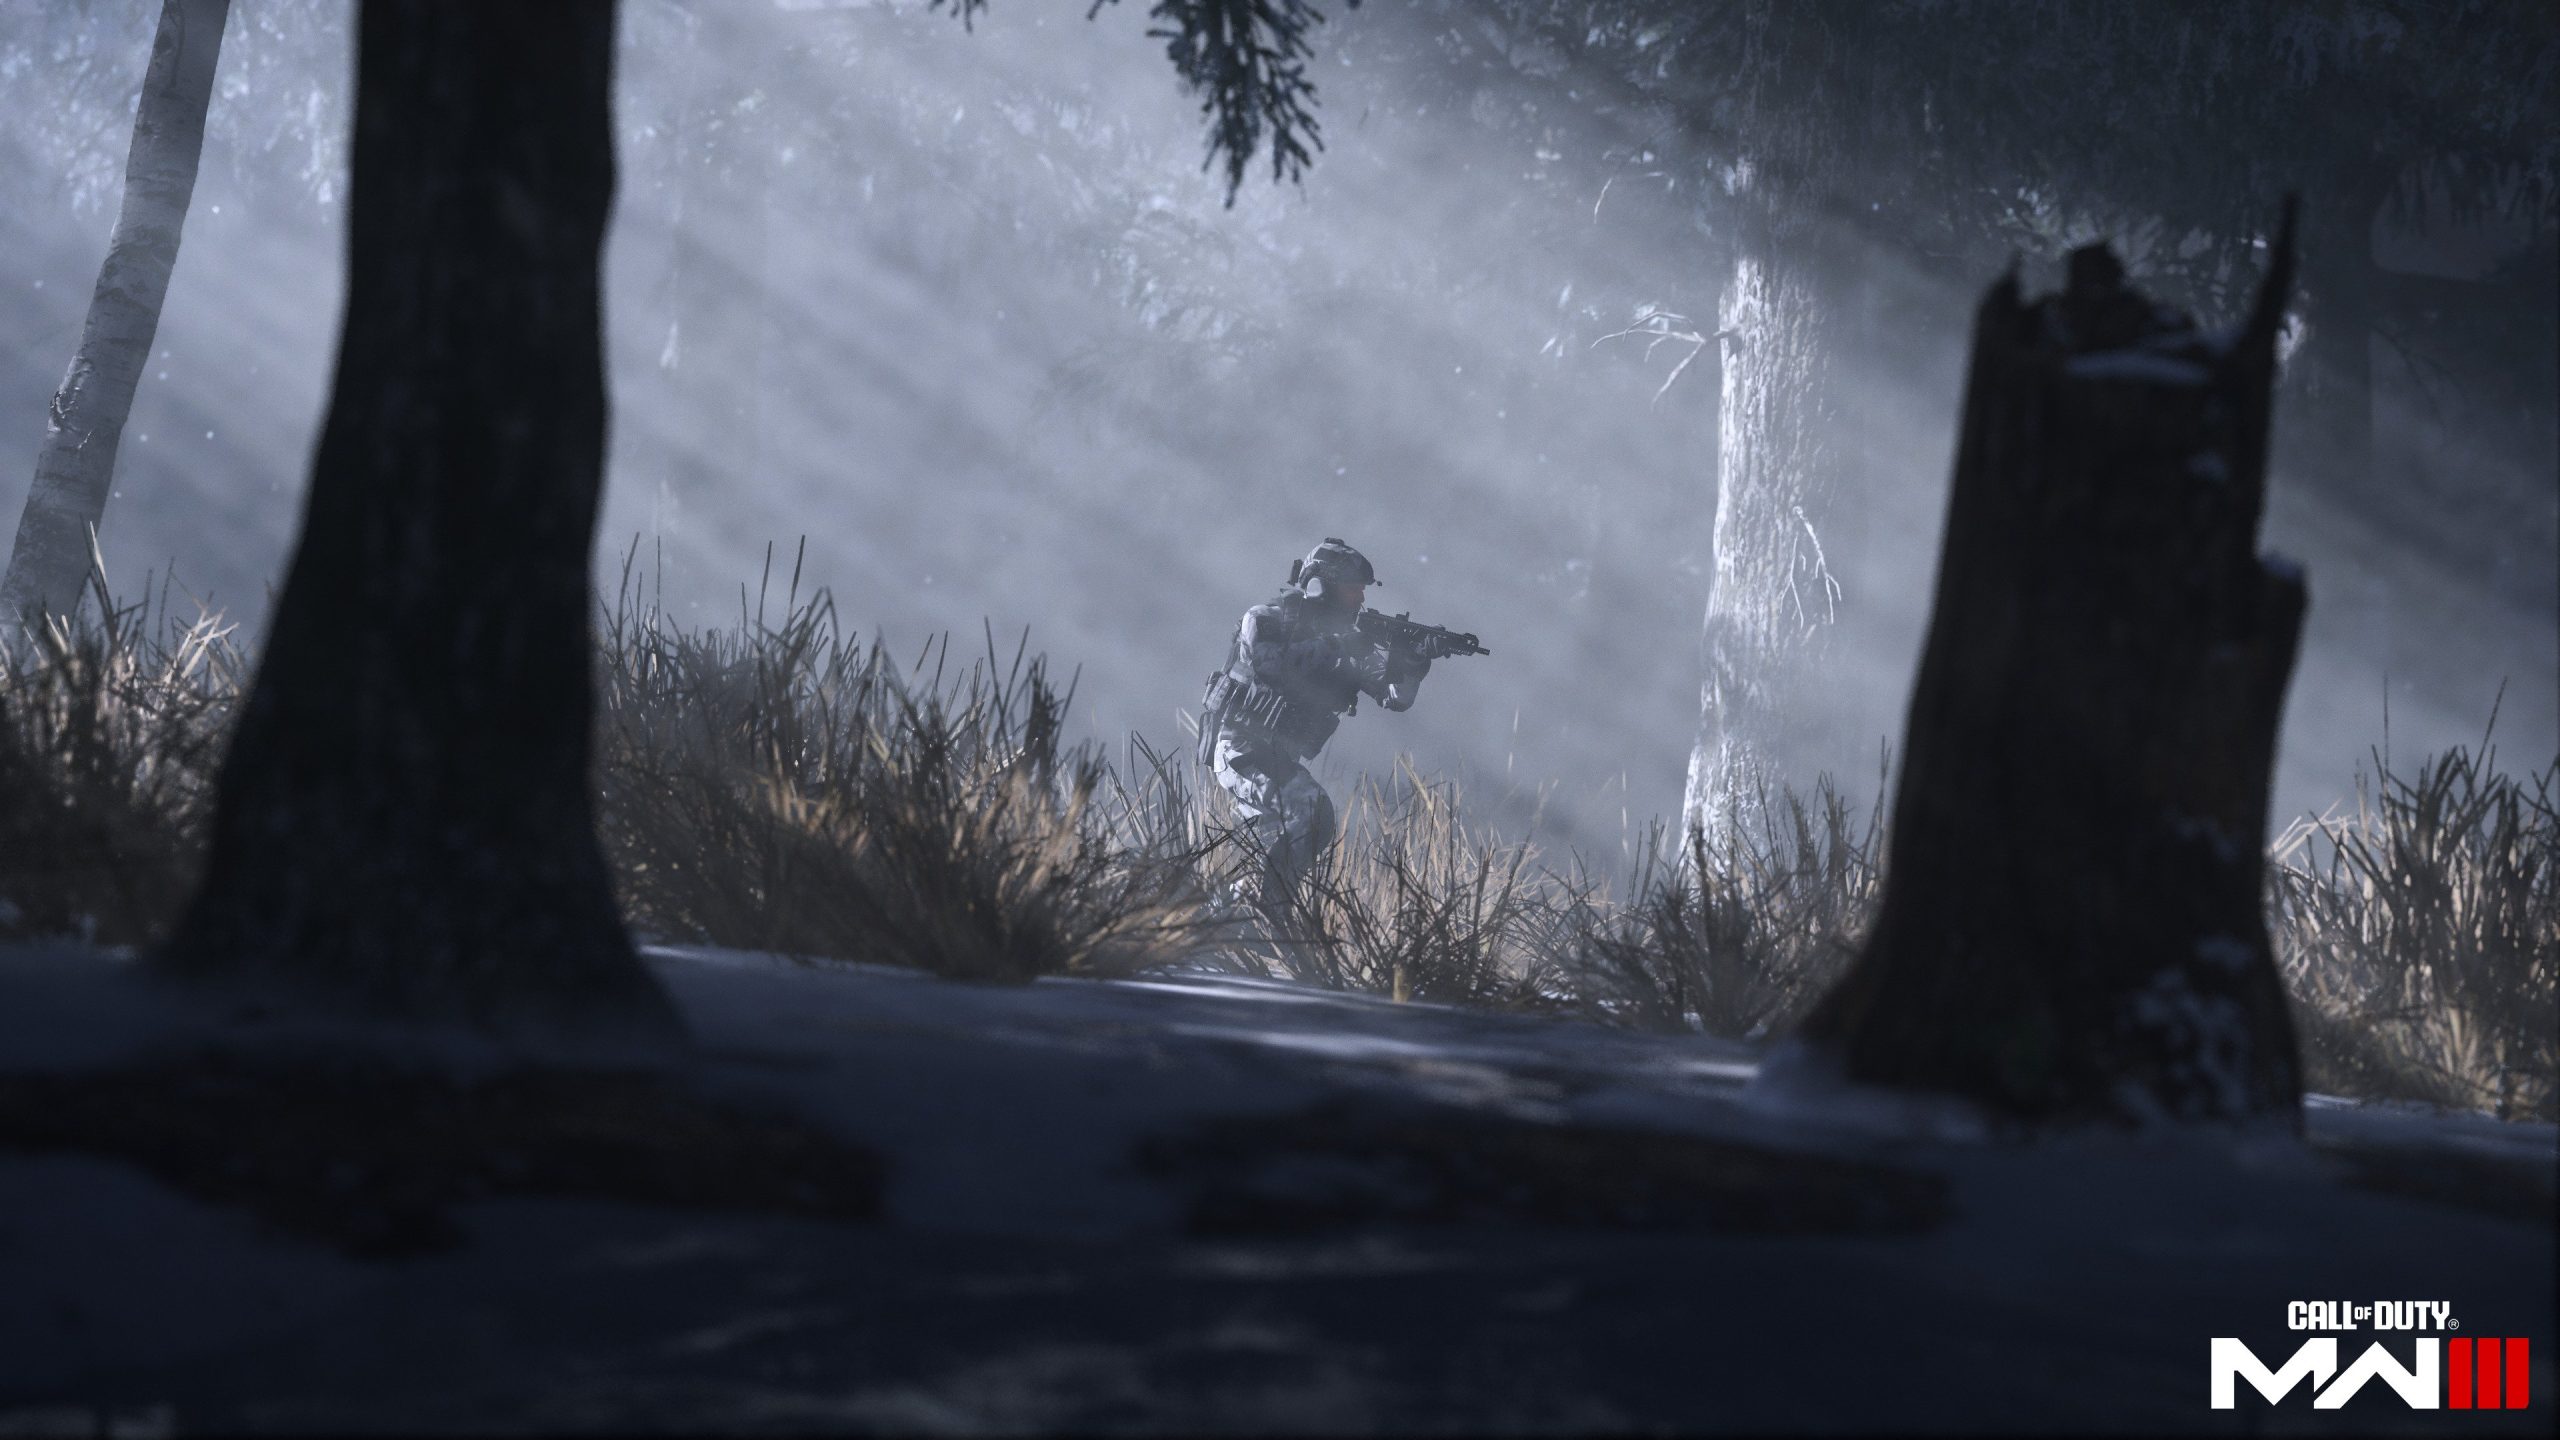 Modern Warfare 3 won't be a PS5 expansion, but it will look like one